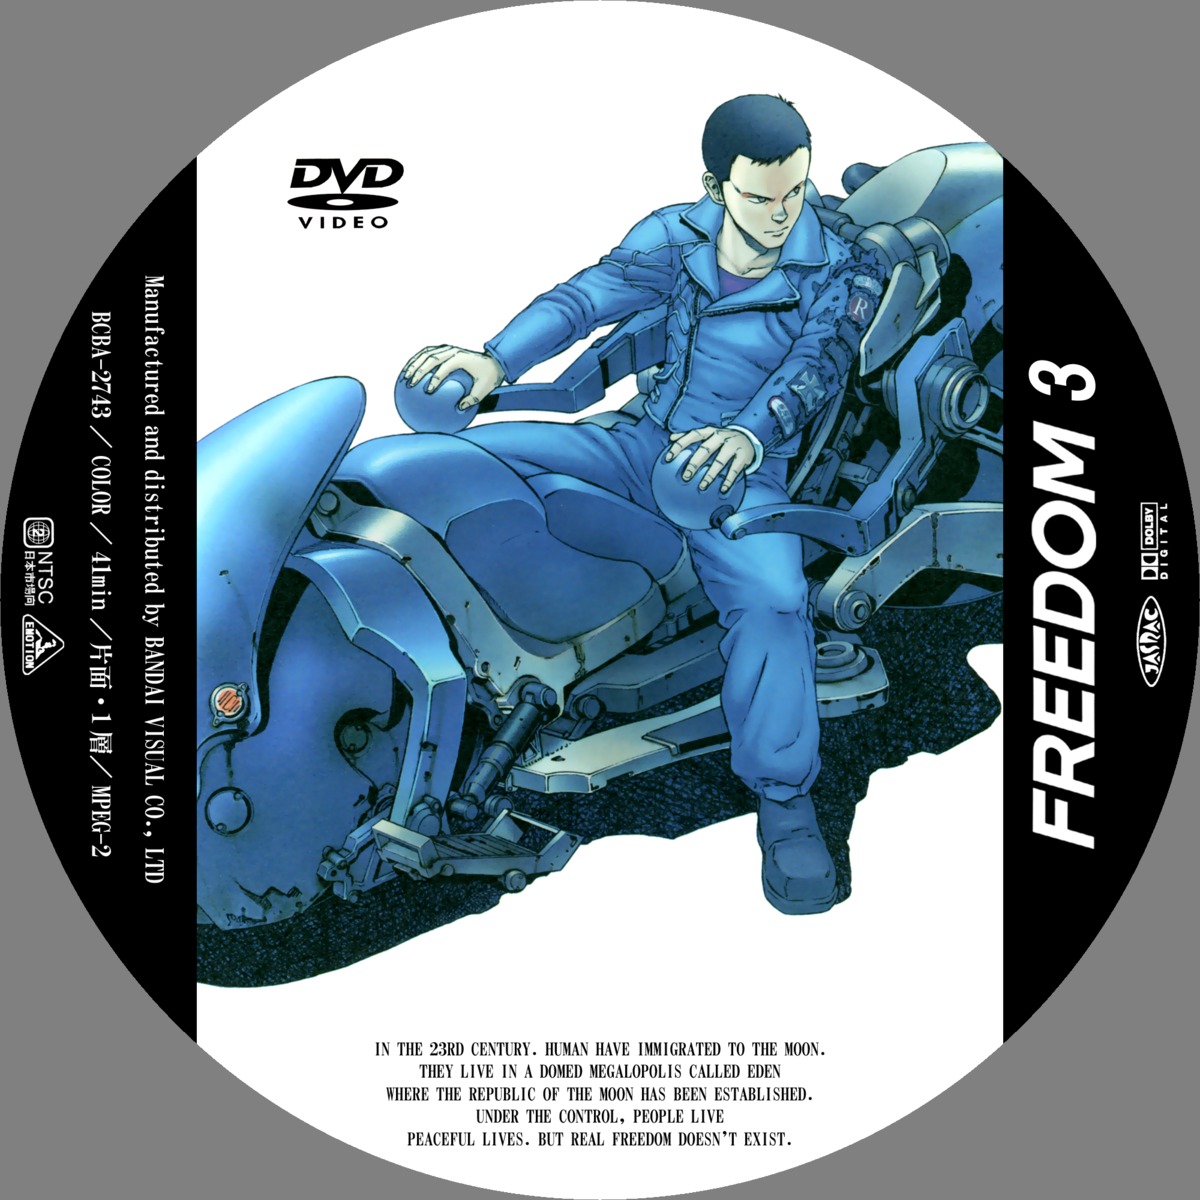 disc_label freedom male